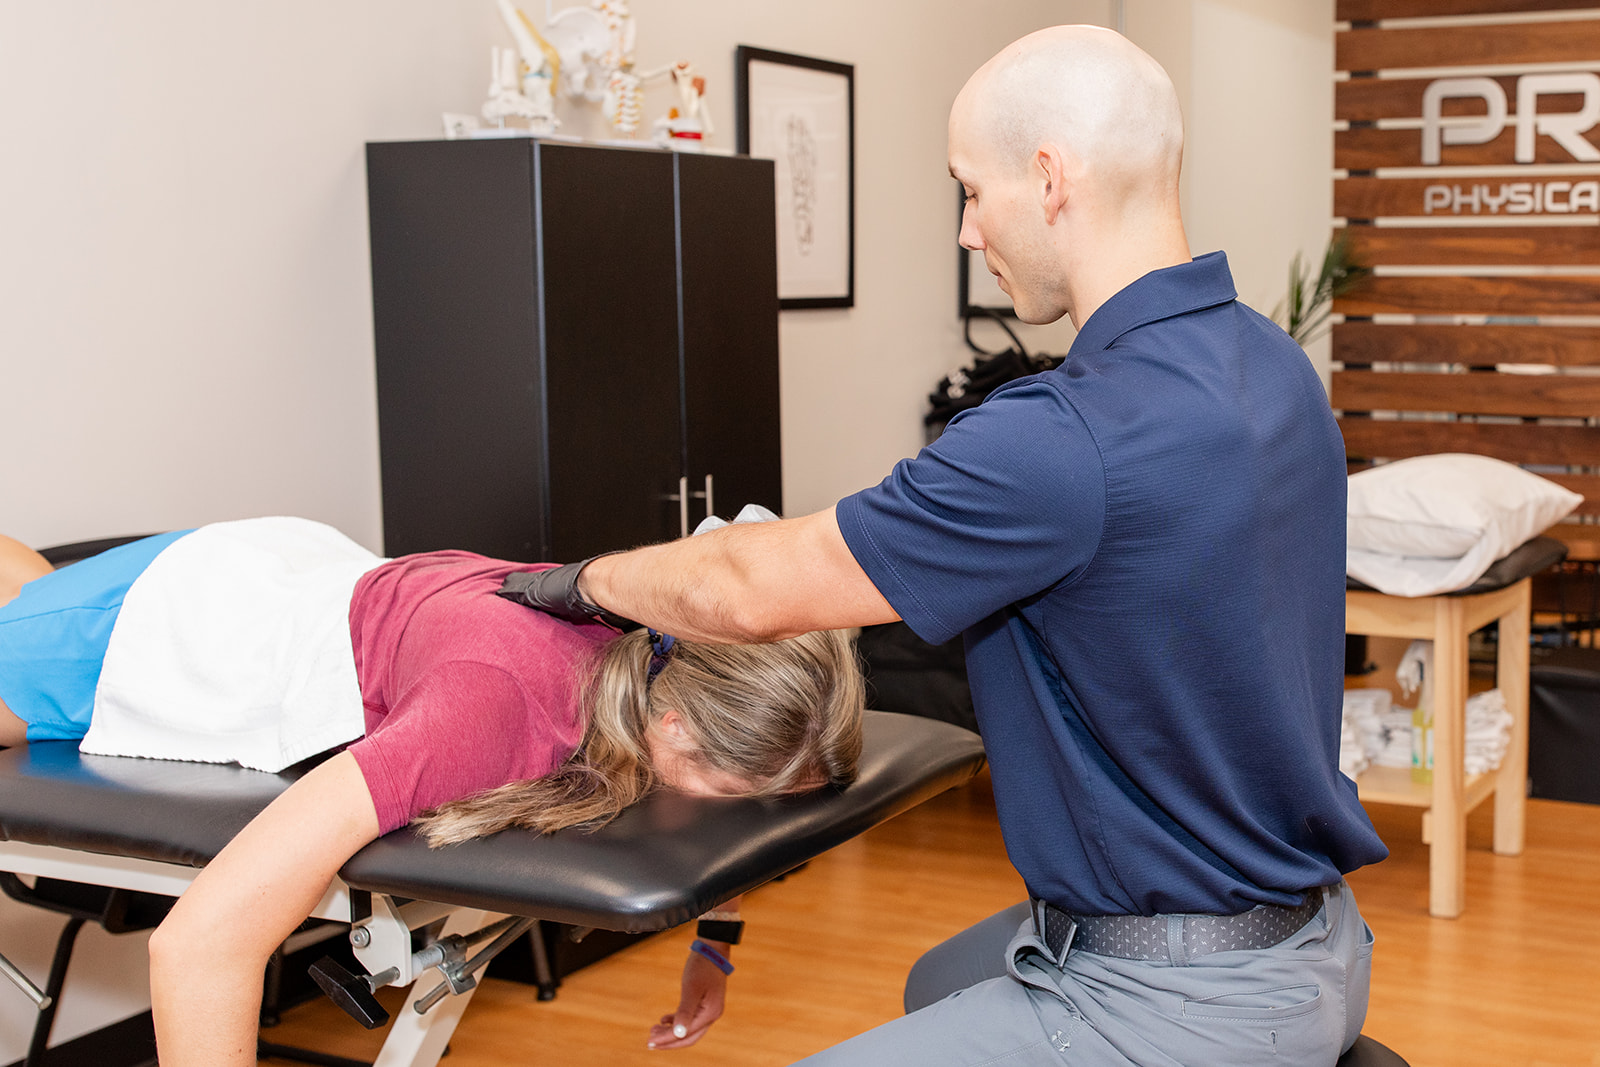 Physical Therapist Dr. Joni treats a patient's ankle in PRIME Physical Therapy's clinic in Eldersburg, Maryland.